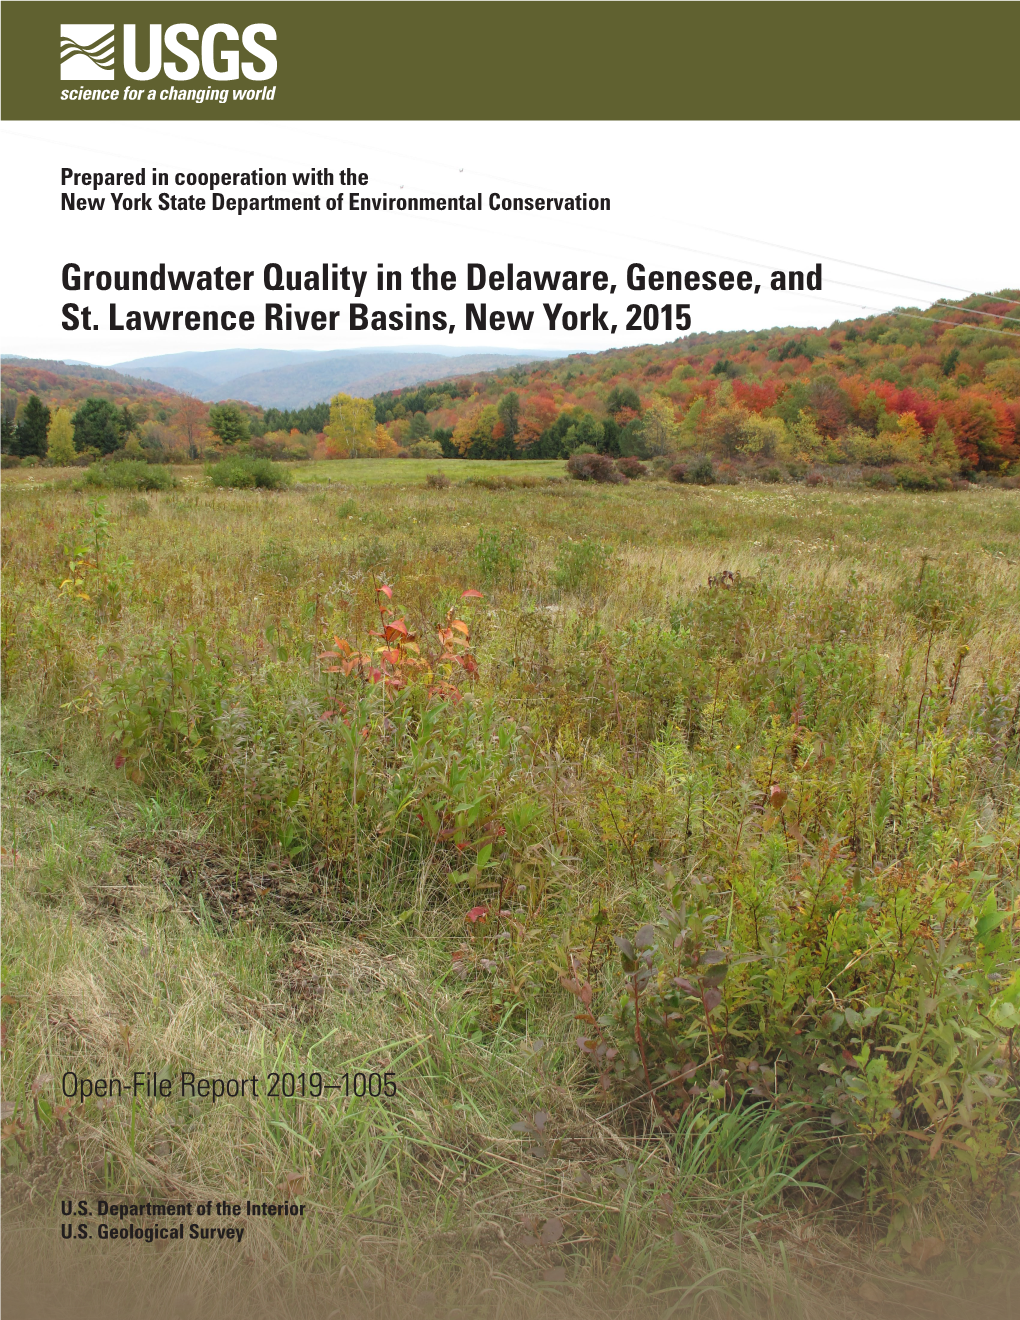 Groundwater Quality in the Delaware, Genesee, and St. Lawrence River Basins, New York, 2015